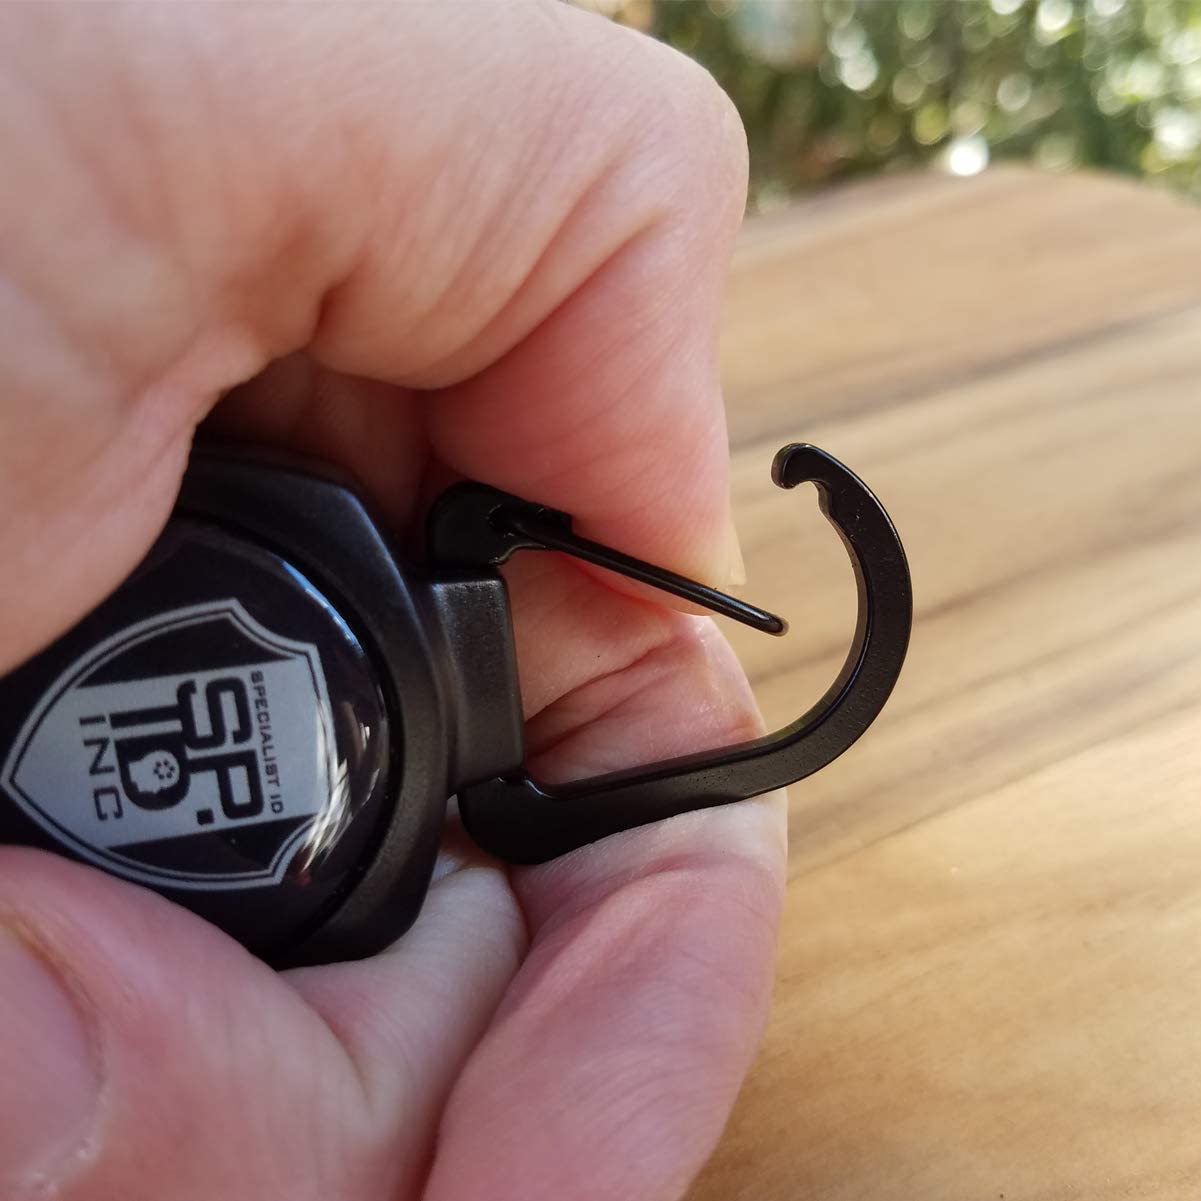 Close-up of a hand holding a SPID Key-Bak SIDEKICK Heavy Duty Retractable Carabiner Badge Reel with ID Holder Strap & Keychain with a metal hook, partially extended against a wooden surface.